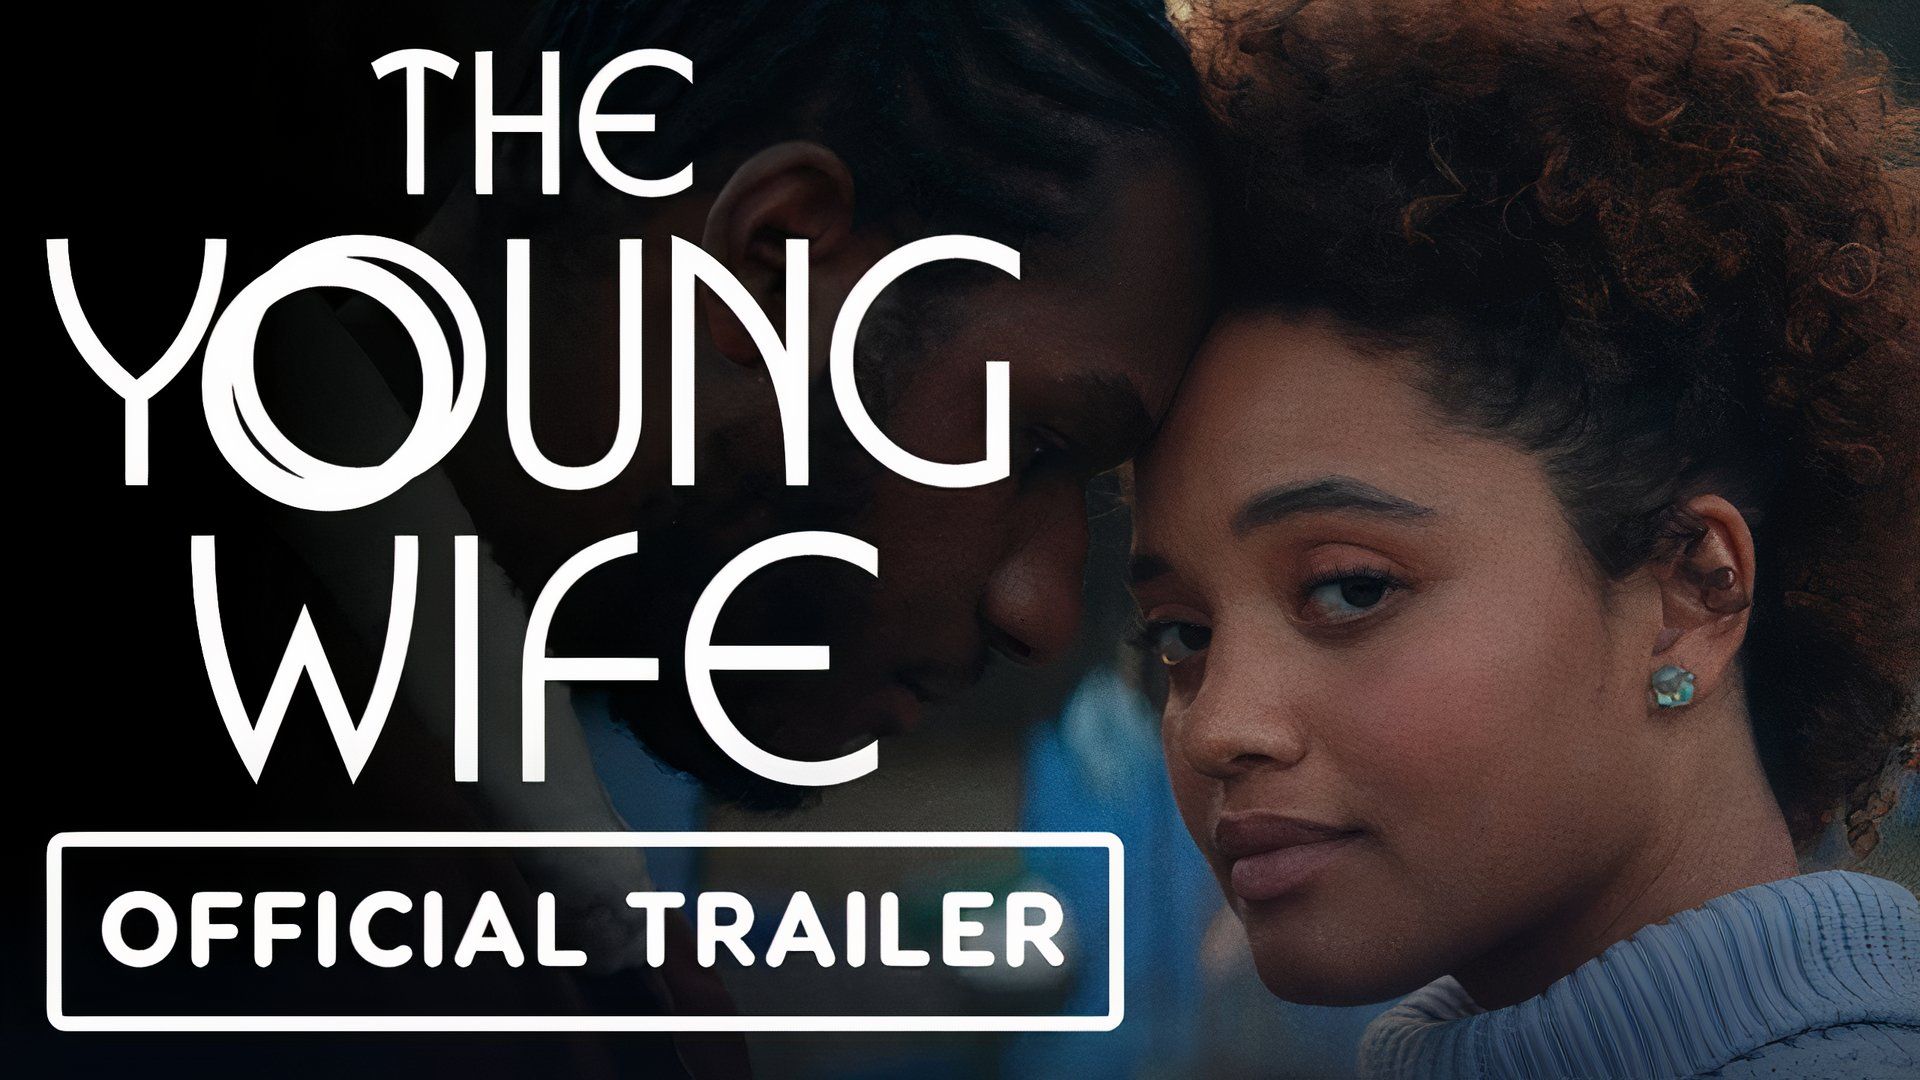 The Young Wife with Kiersey Clemons official trailer